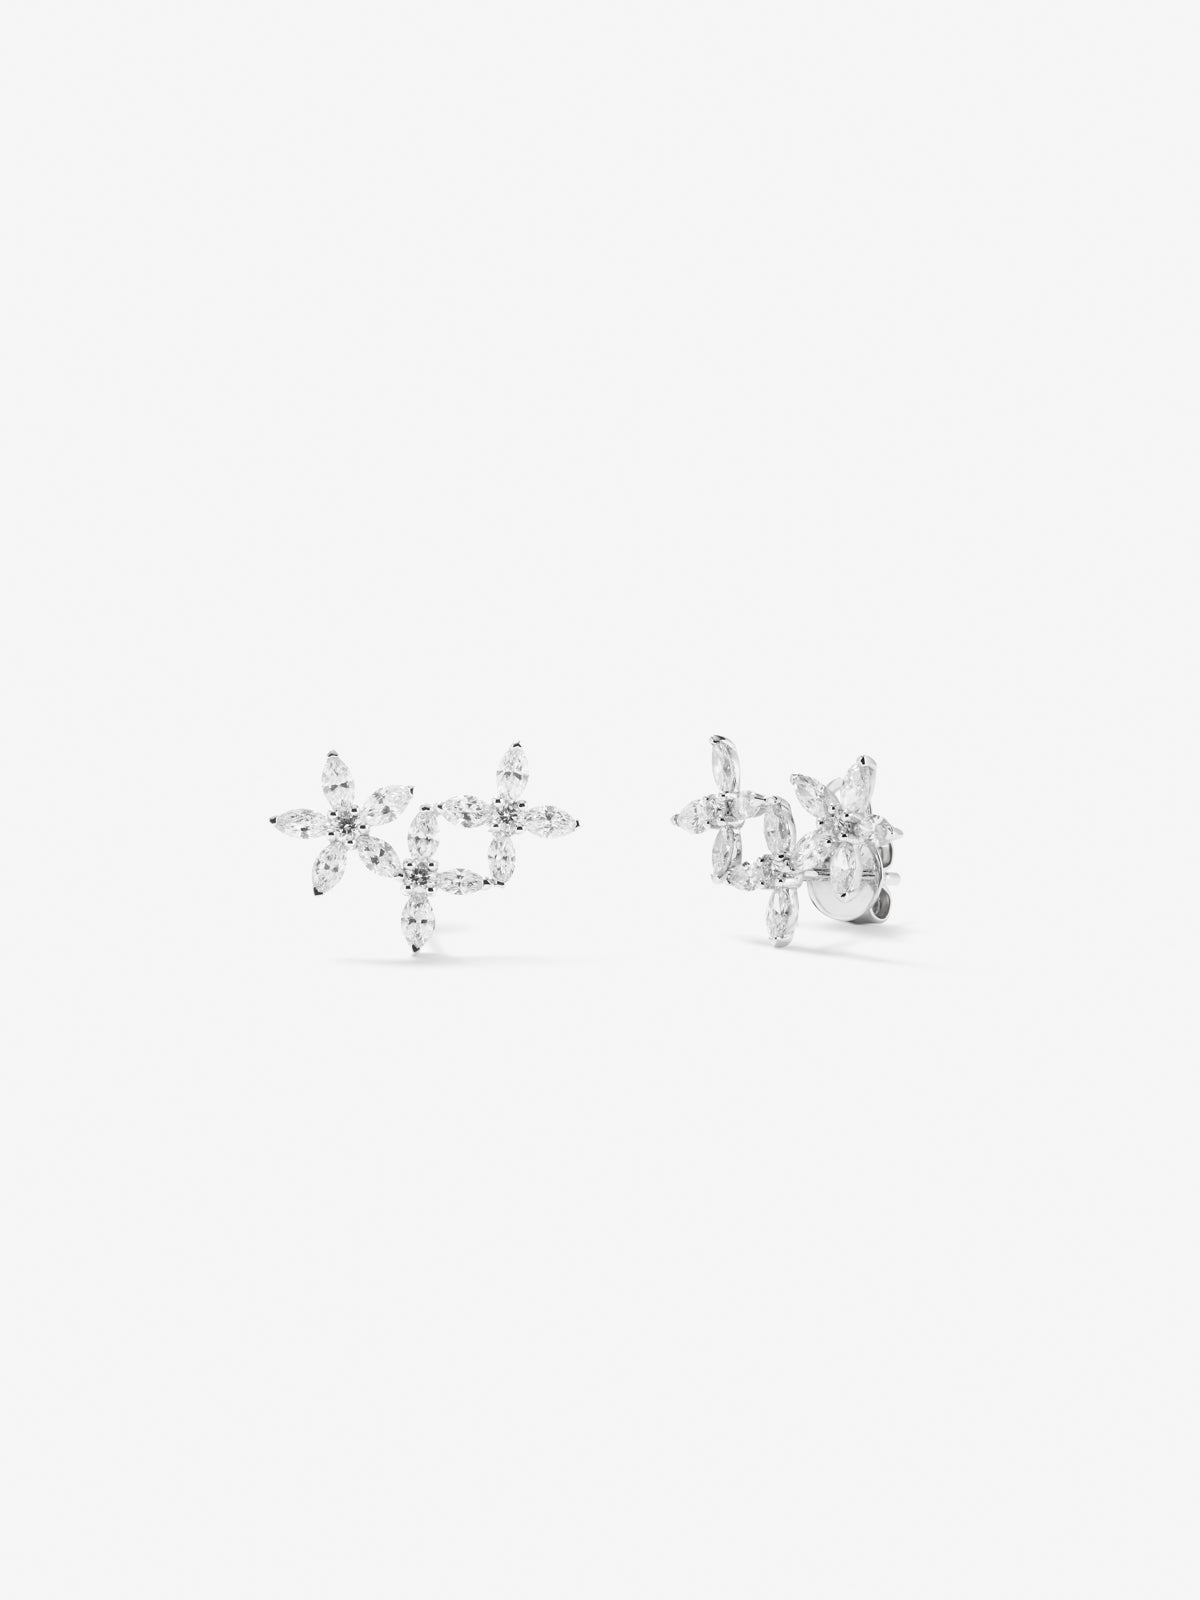 18K white gold star climbing earrings with 24 marquise cut diamonds with a total of 1.31 cts and 6 brilliant cut diamonds with a total of 0.14 cts